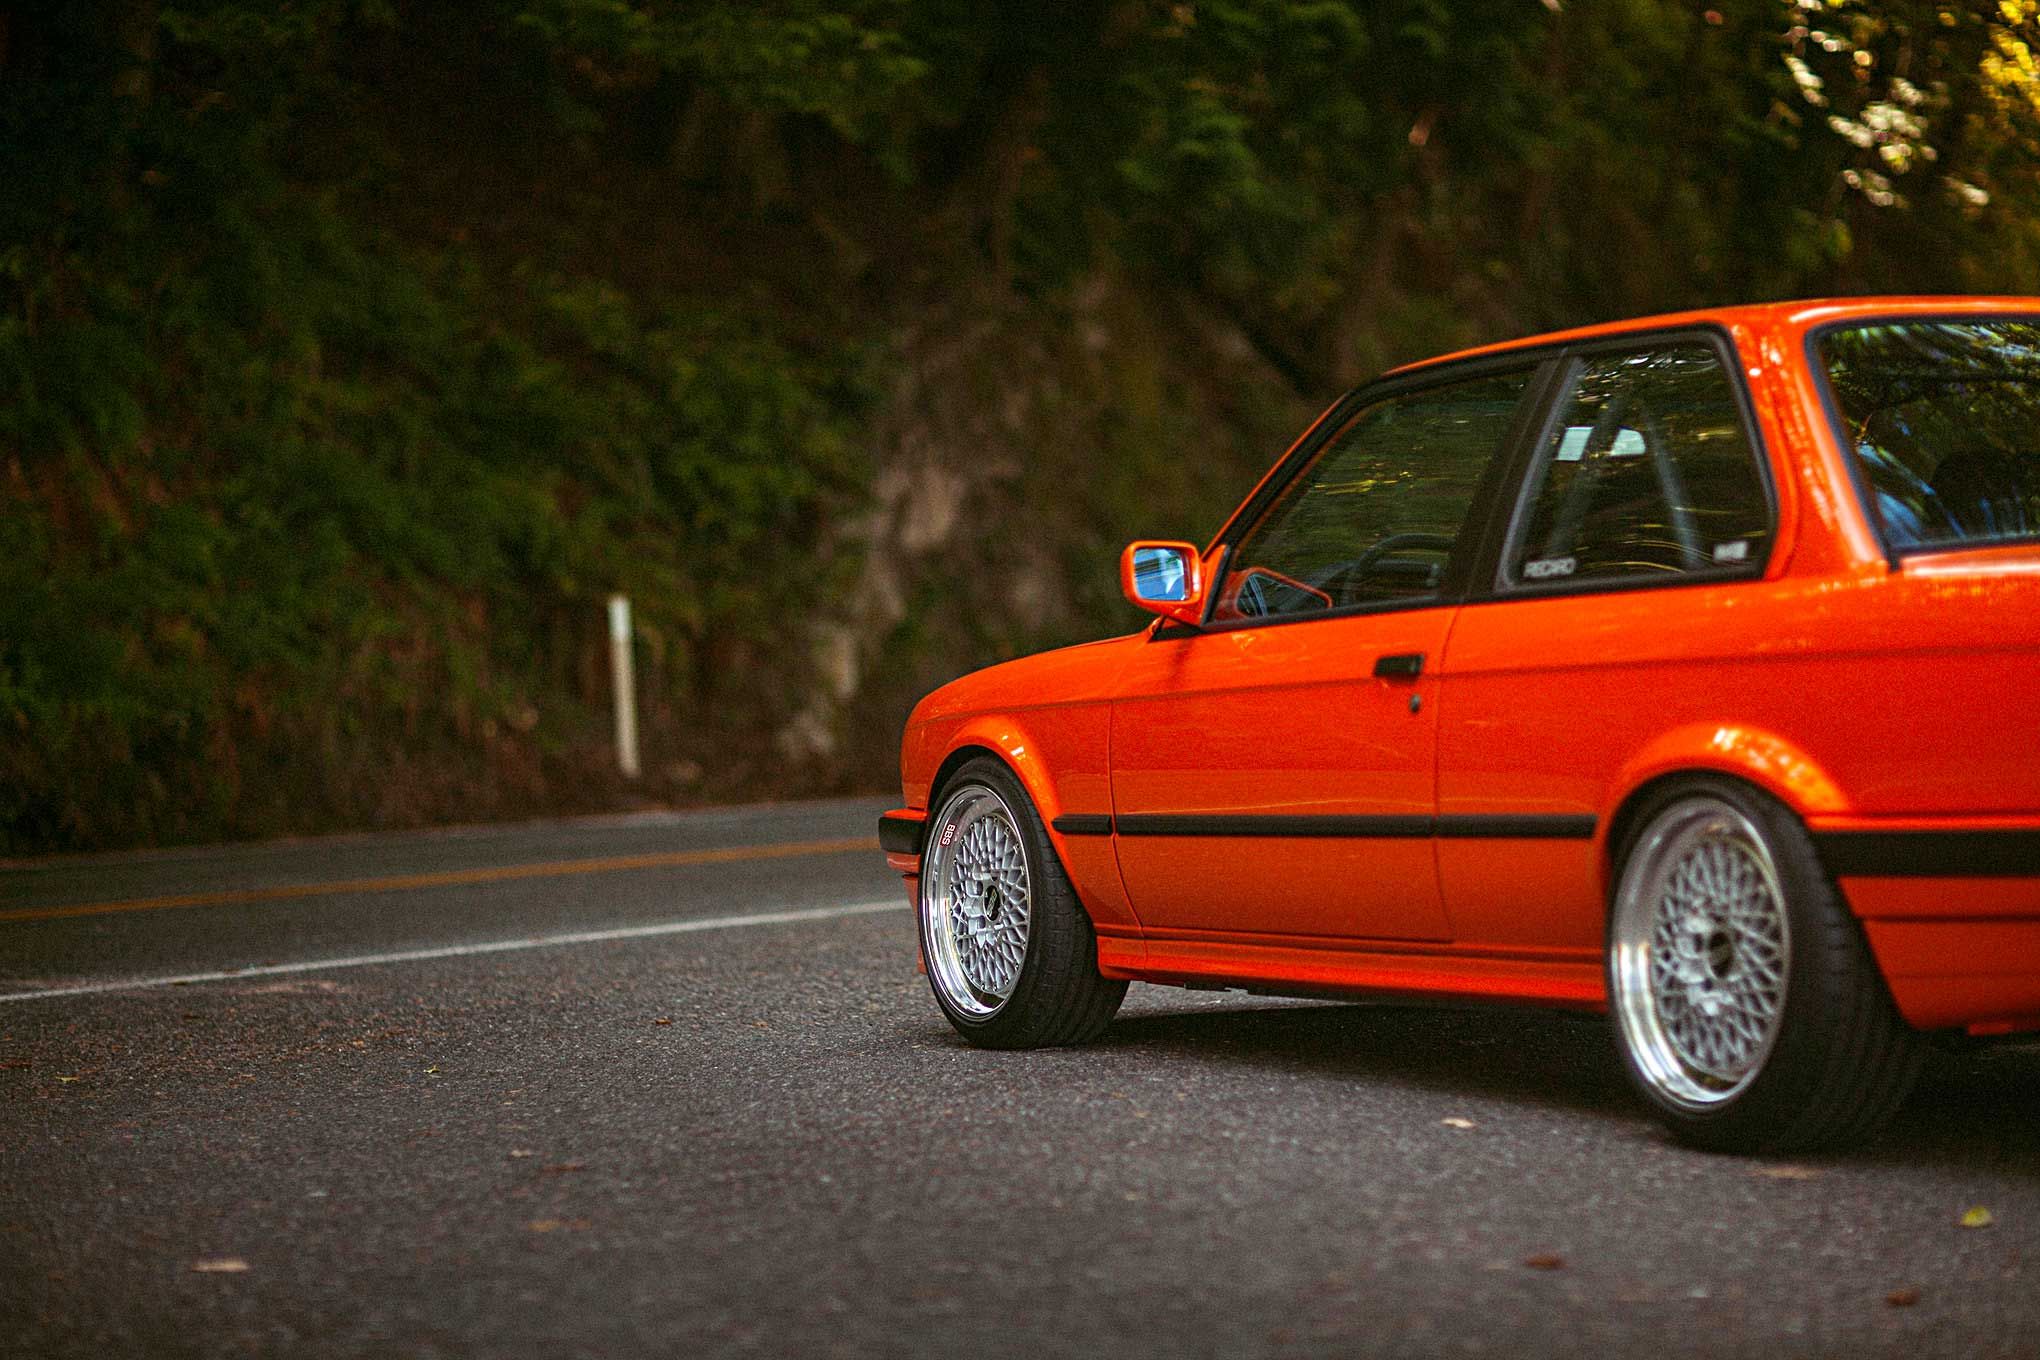 1991-bmw-318is-driver-side-view.jpg